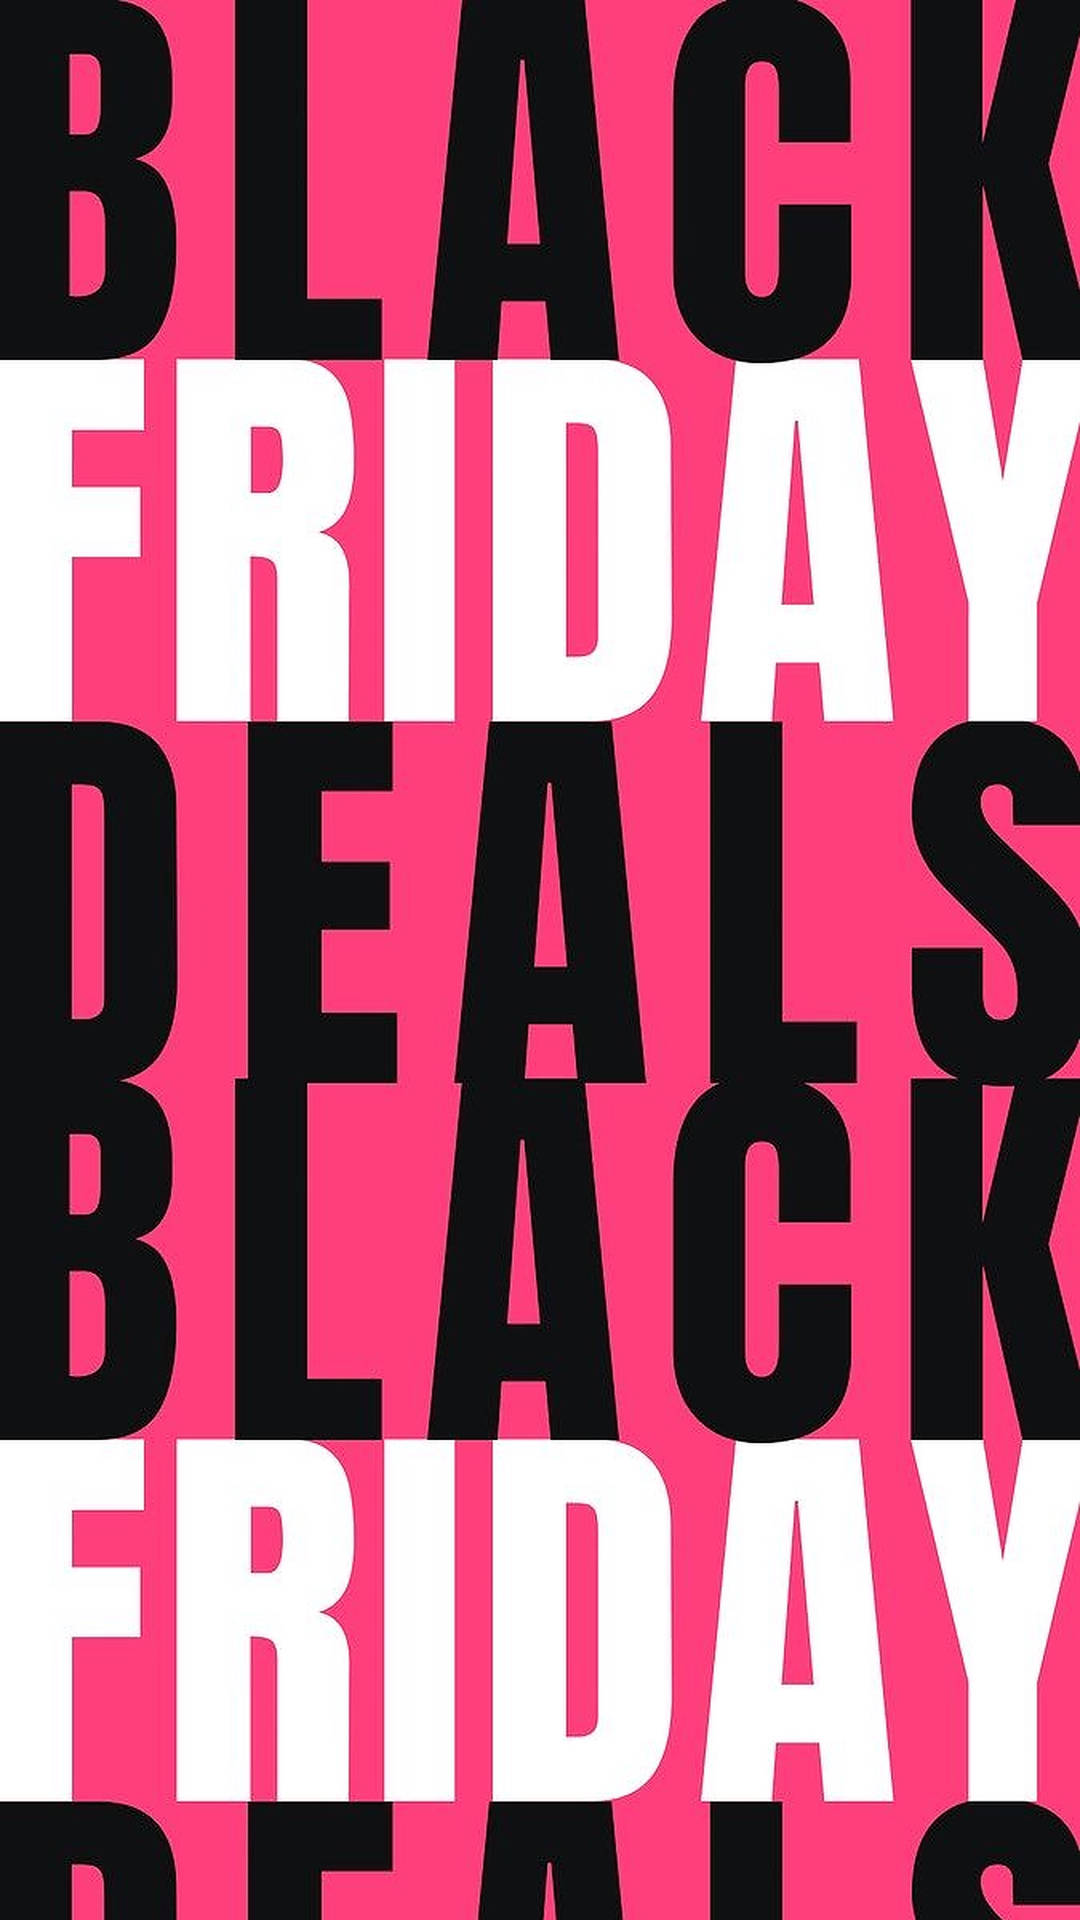 Captivating Black Friday Deals And Discounts Background